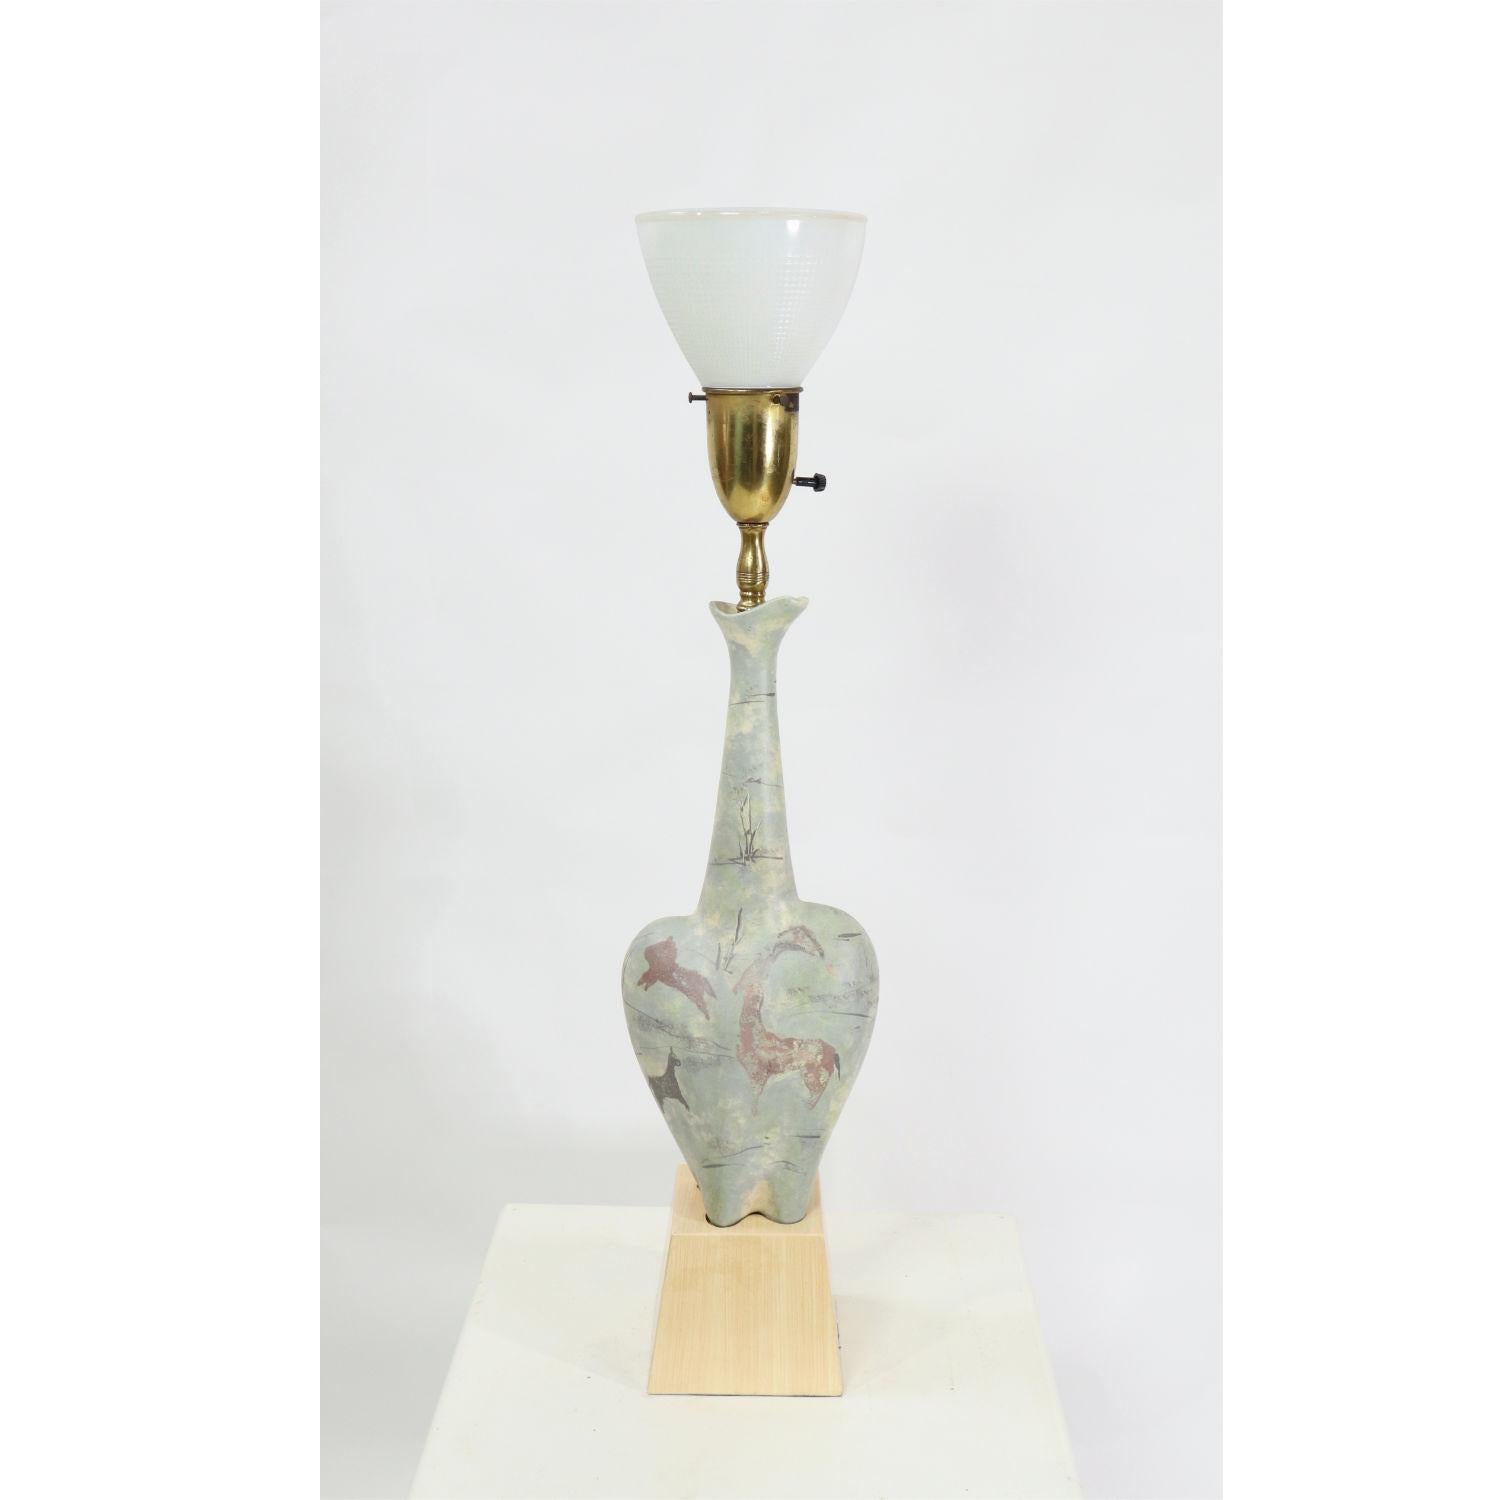 This is easily one of the most interesting Mid-Century Modern lamps we’ve come across! Everything about the lamp is unique, from it’s unusual shape to the lip at the top of the bottle neck. The shape mimics a woman’s hips, adorned with Lascaux style